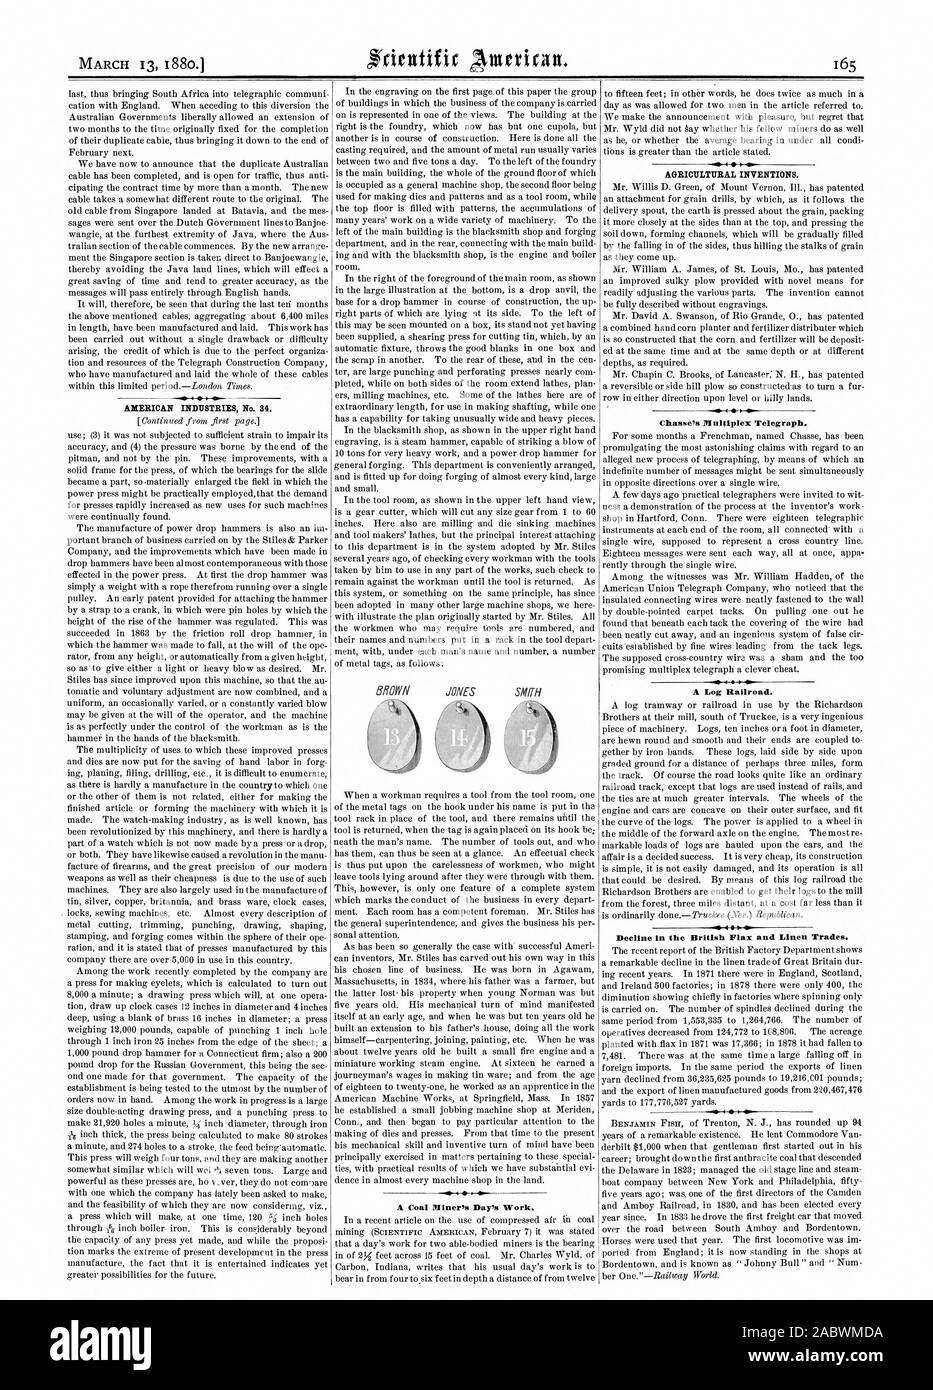 AMERICAN INDUSTRIES No. 34. A Coal Miner's Day's Work. AGRICULTURAL INVENTIONS. Chasse's Multiplex Telegraph. A Log Railroad., scientific american, 80-03-13 Stock Photo